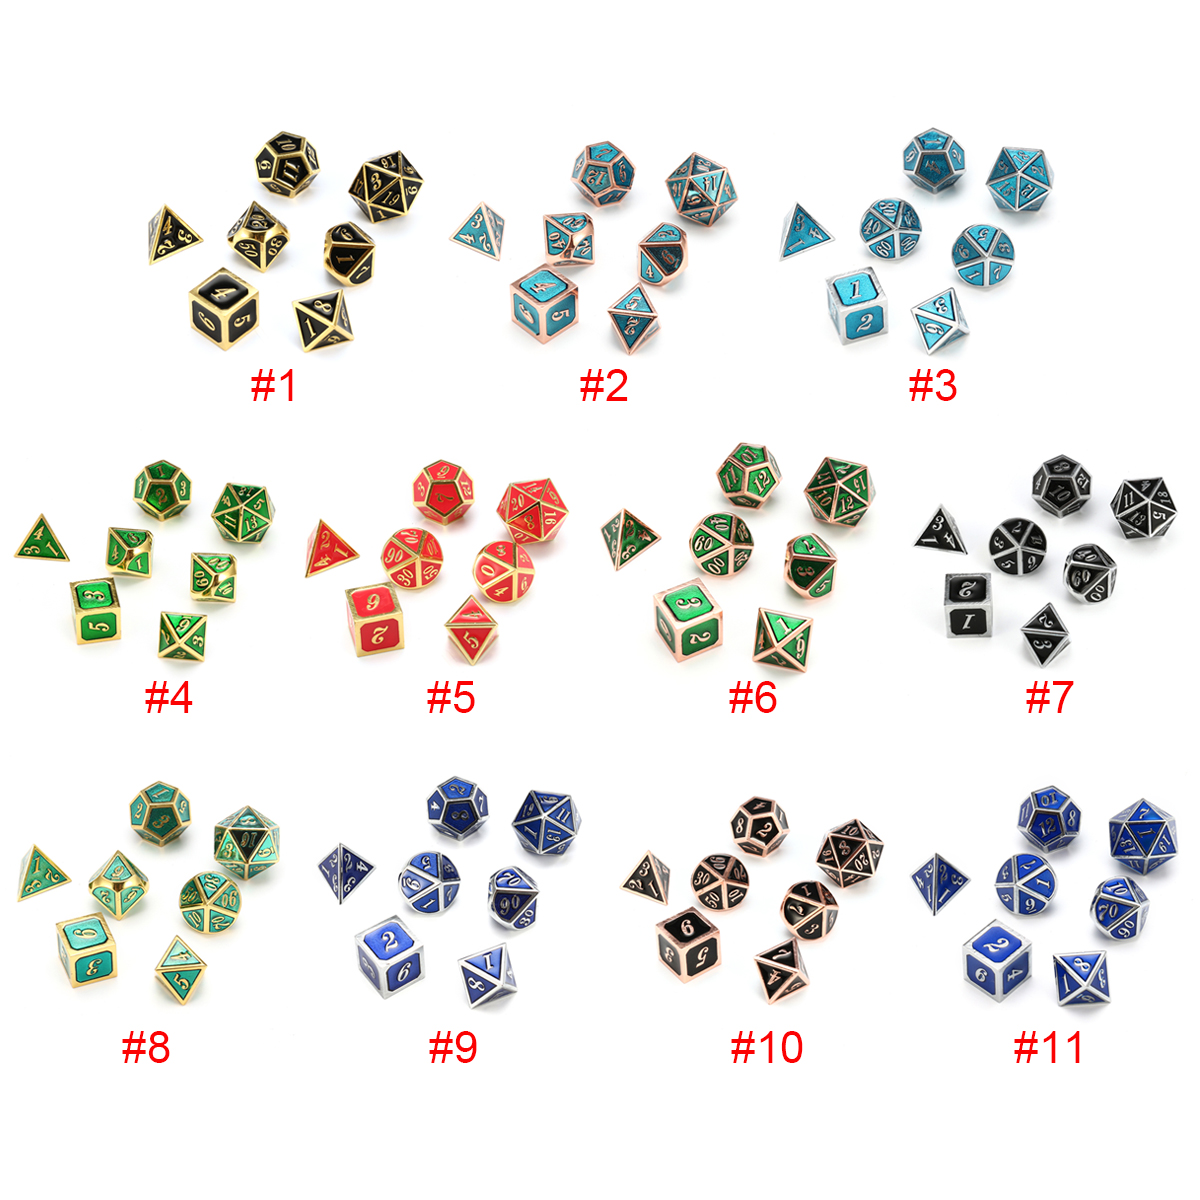 7pcs-Zinc-Alloy-Multisided-Dices-Set-Enamel-Embossed-Heavy-Metal-Polyhedral-Dice-With-Bag-1272100-1